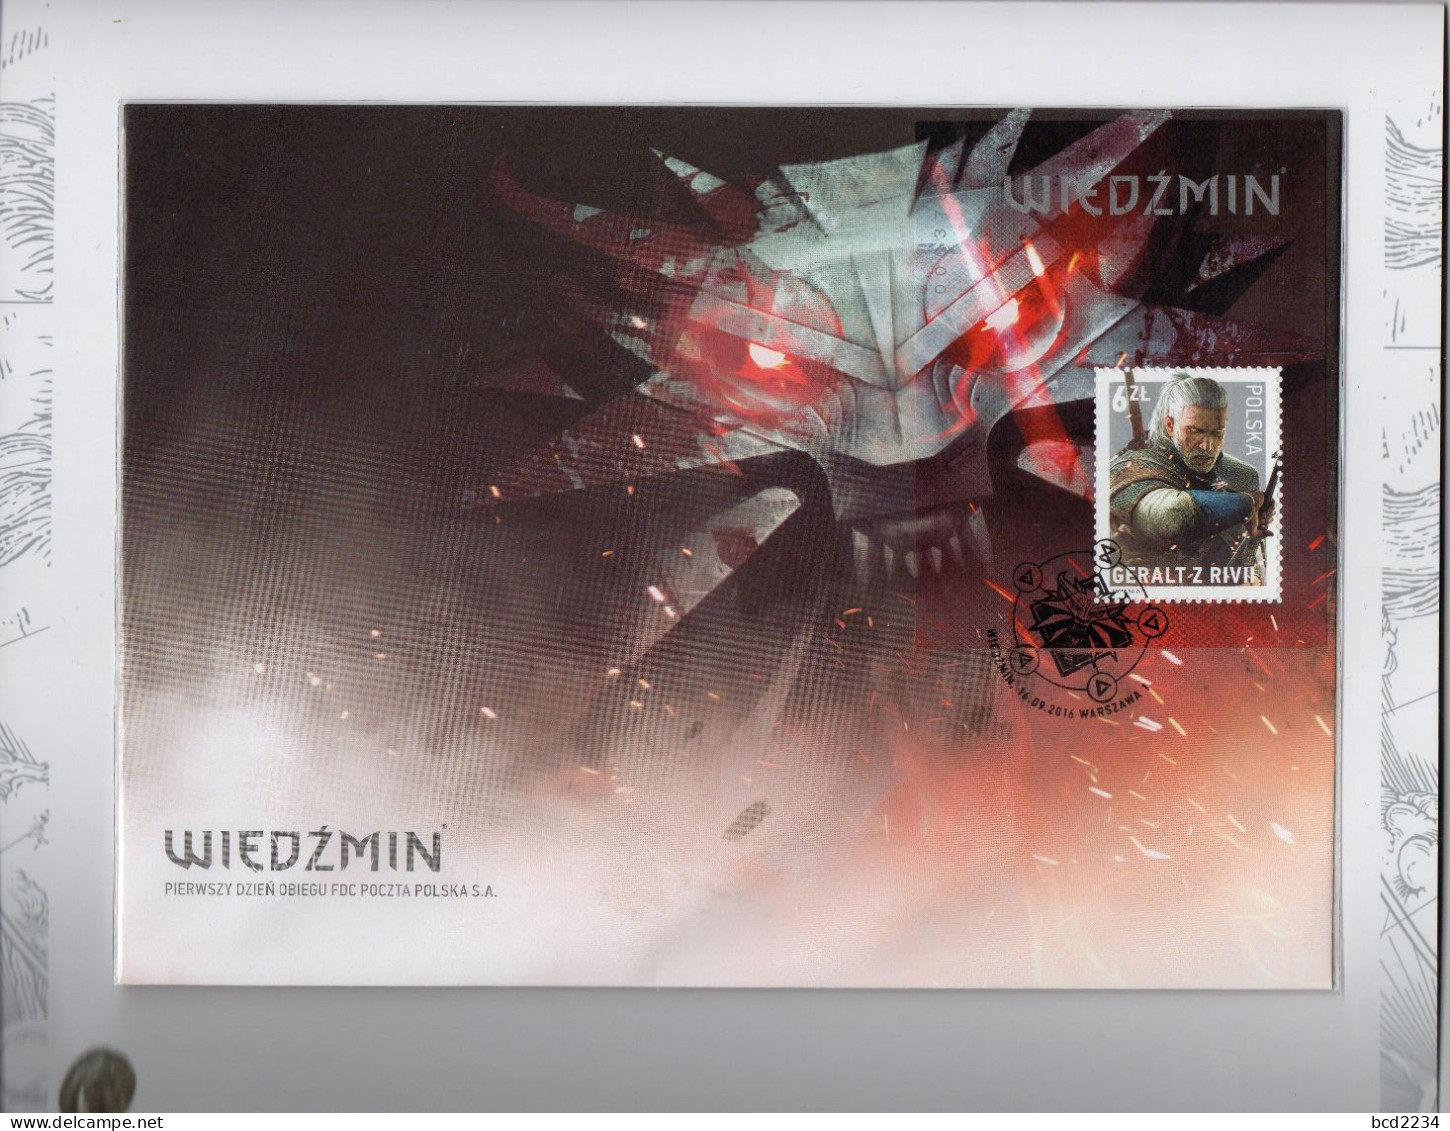 POLAND 2016 SPECIAL LIMITED EDITION PHILATELIC FOLDER: GERALT THE WITCHER FANTASY BOOKS WRITERS TV SERIES GAME MS & FDC - FDC